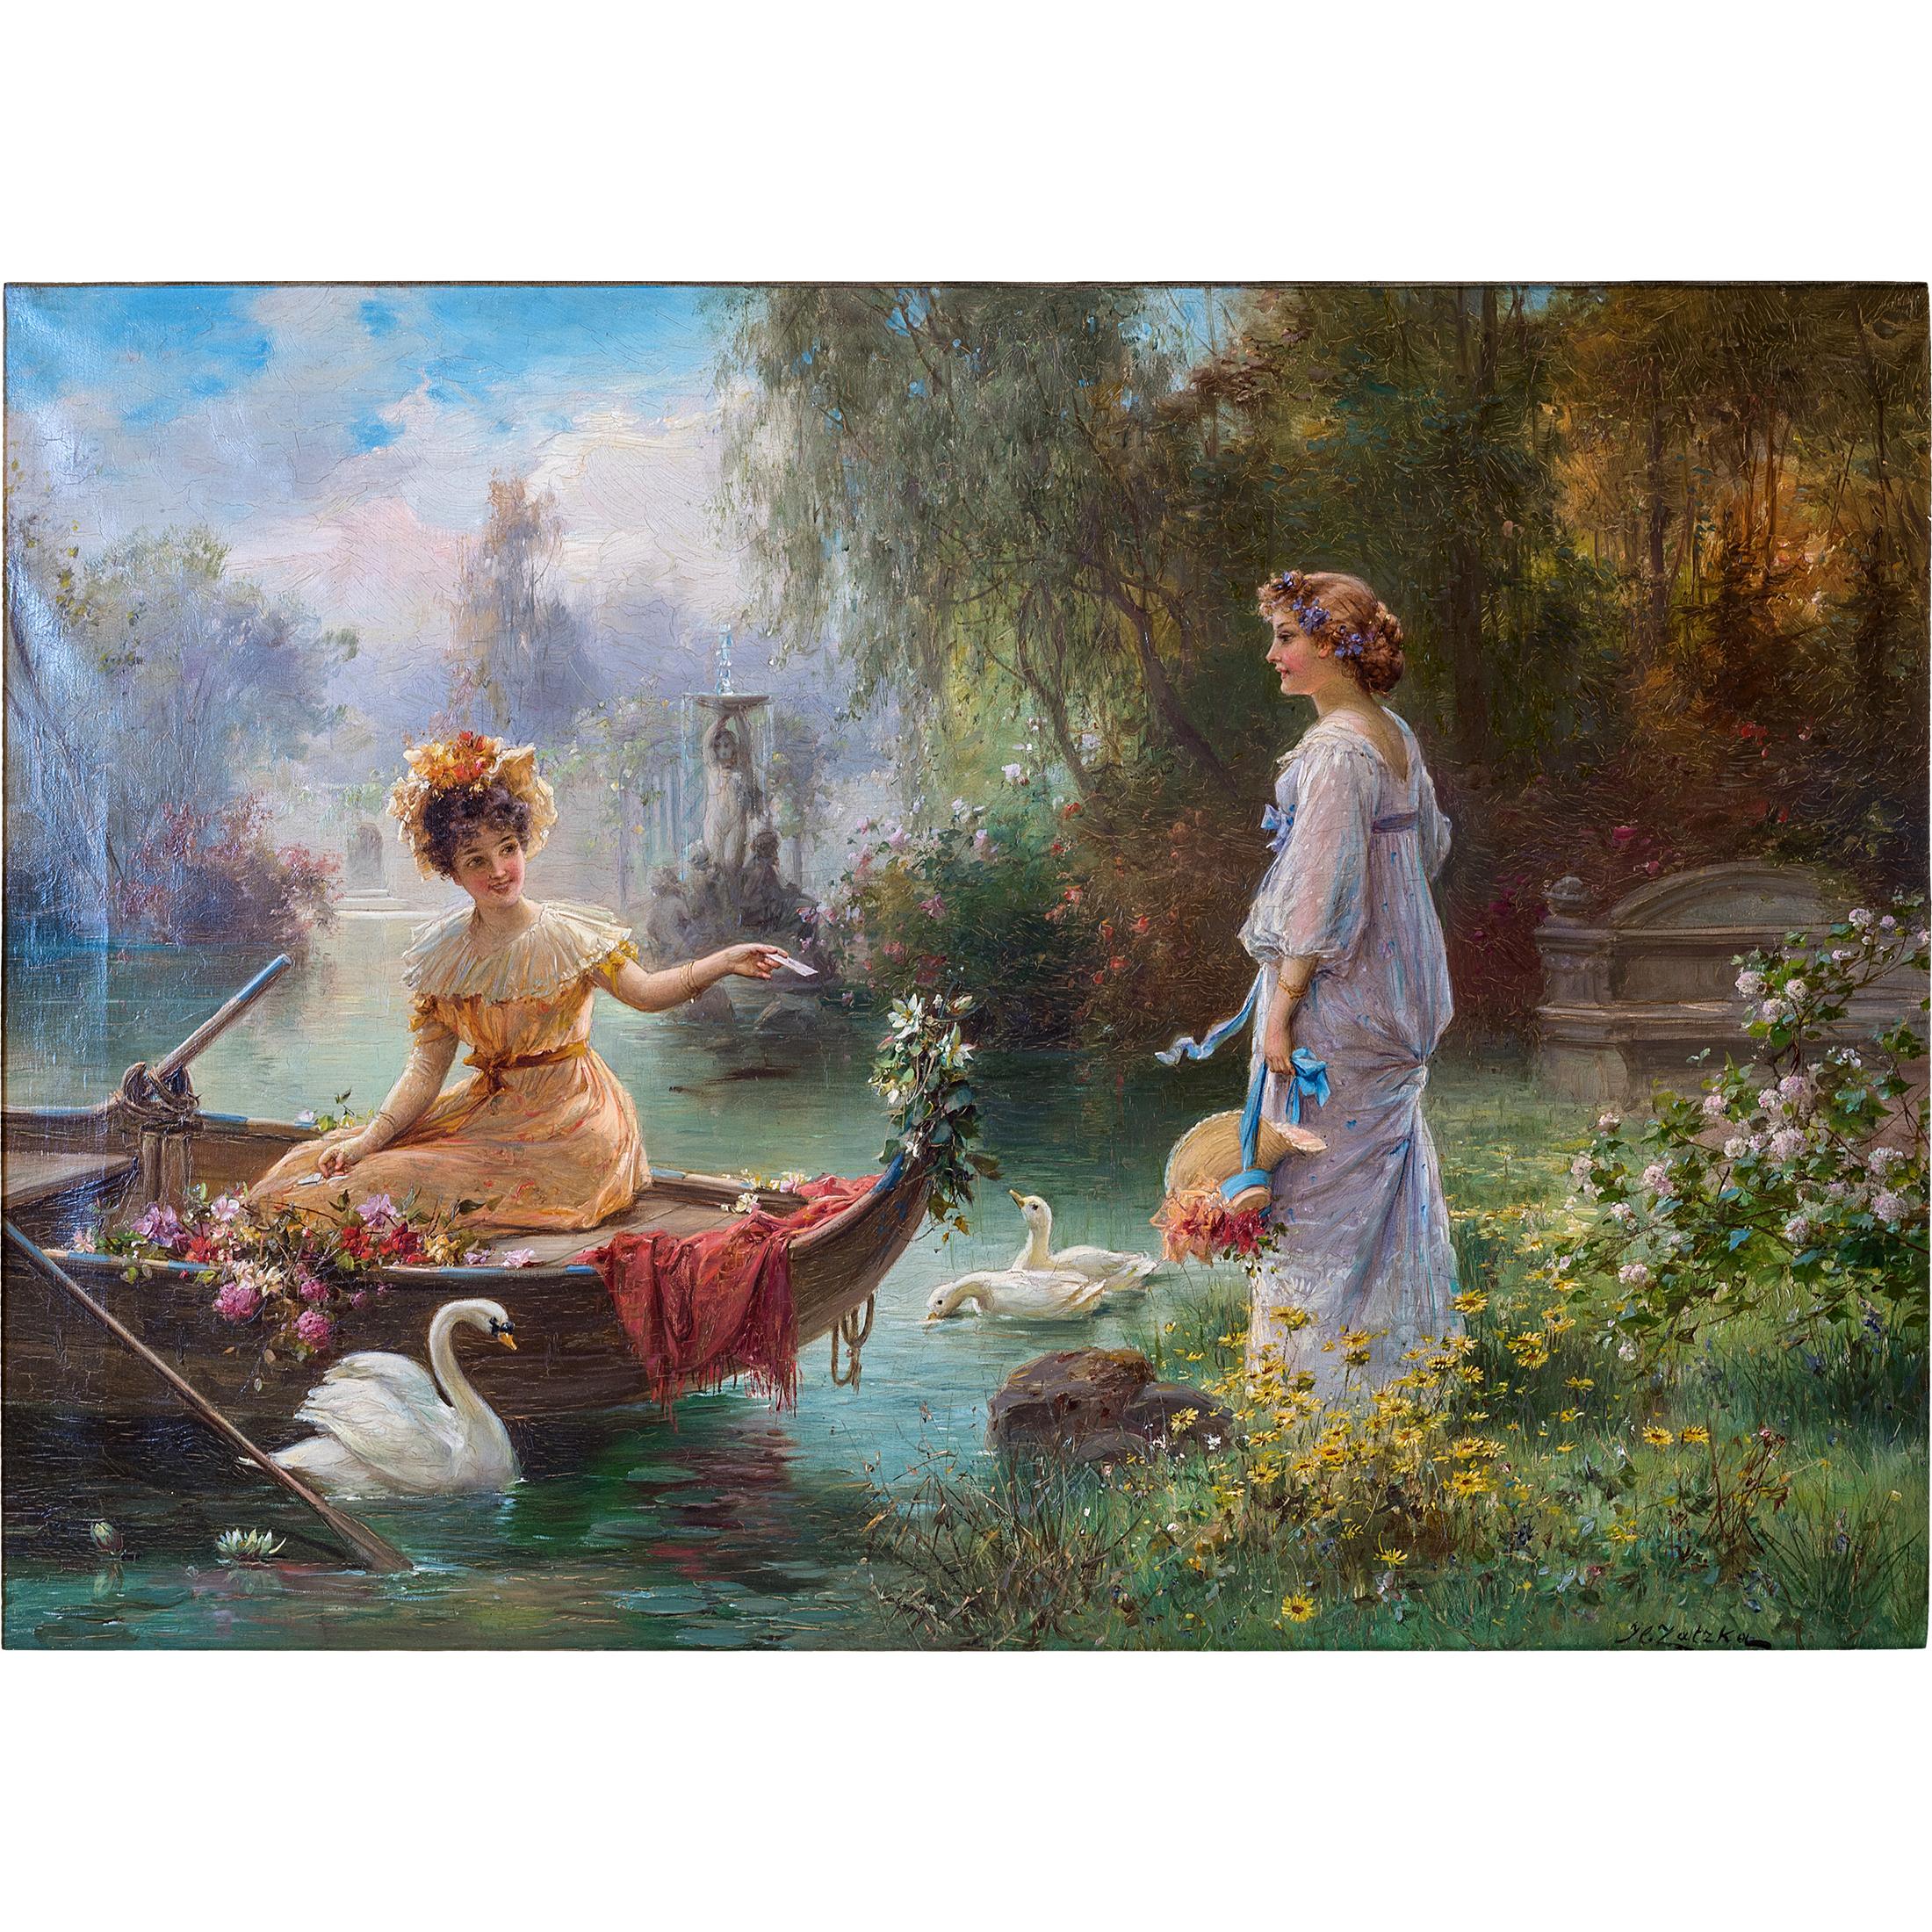 Mail from Across the Pond - Painting by Hans Zatzka